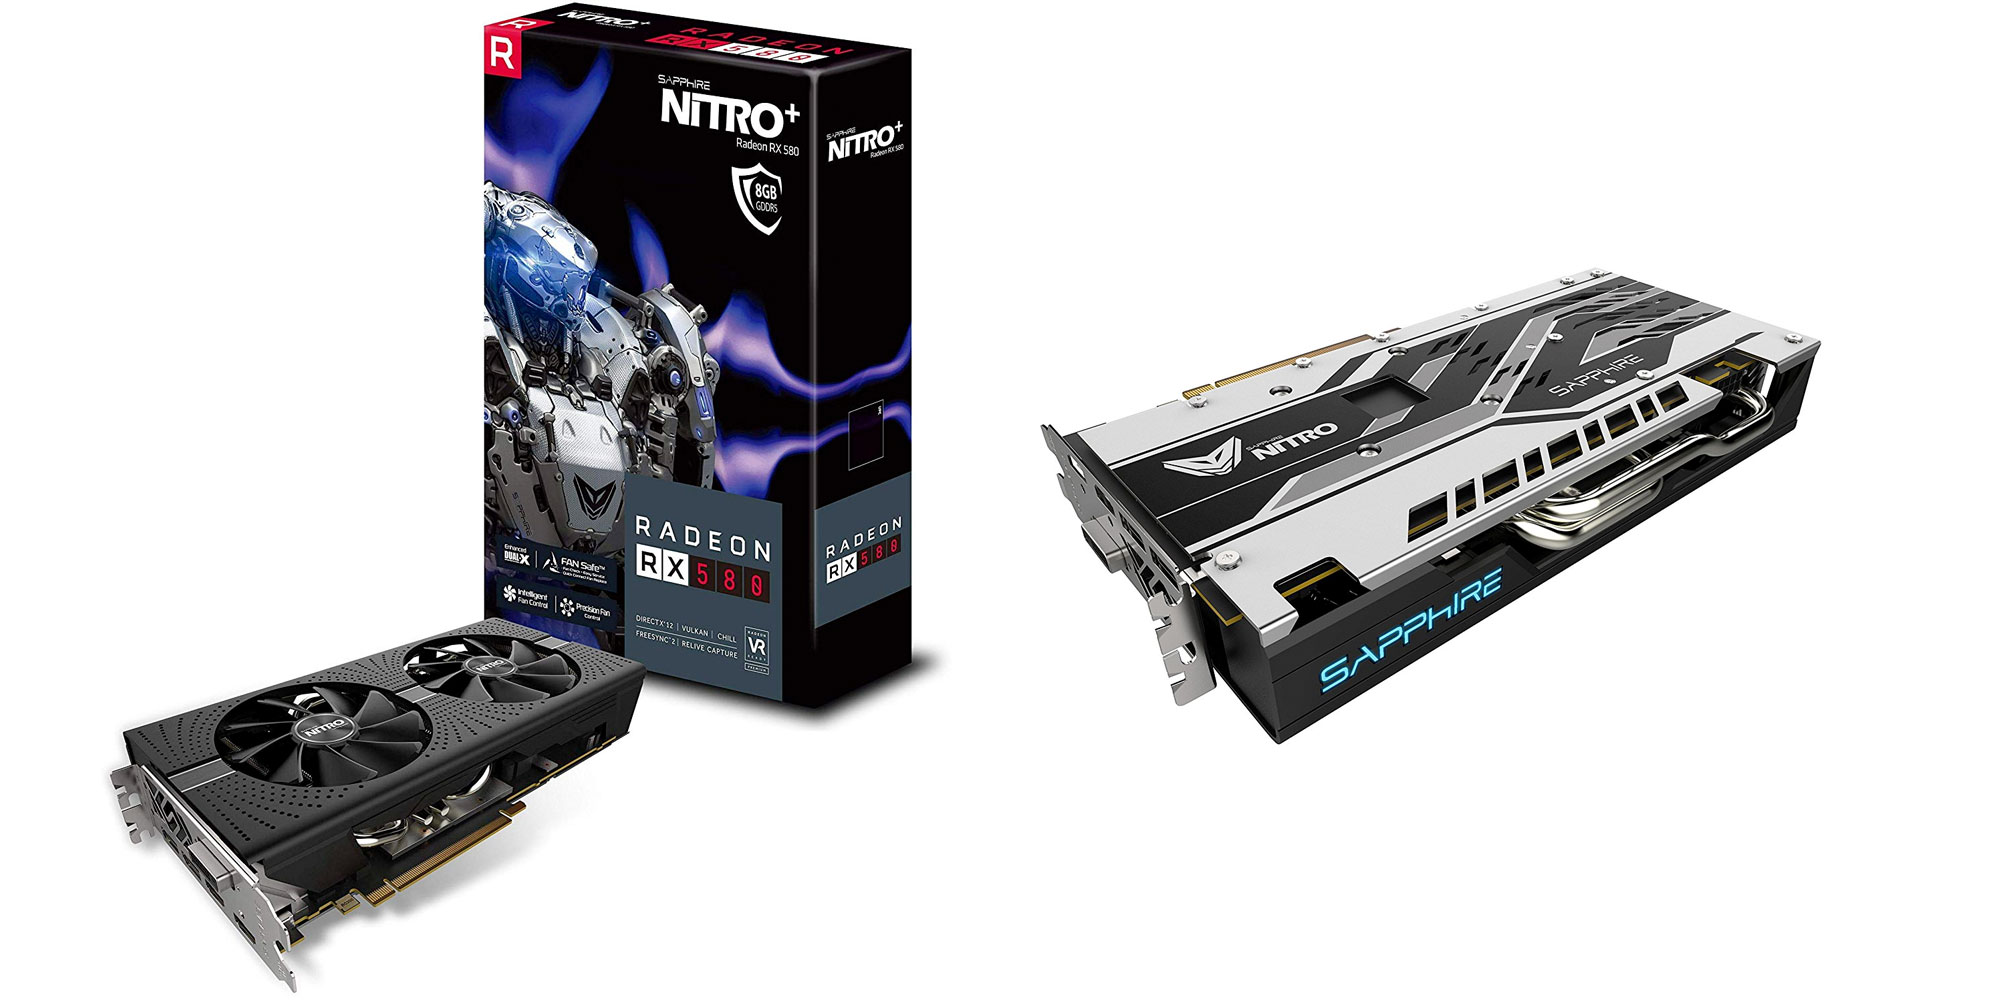 Sapphire S Nitro Rx 580 8gb Gpu Is Perfect For Your Mac Mini At 0 More 9to5toys